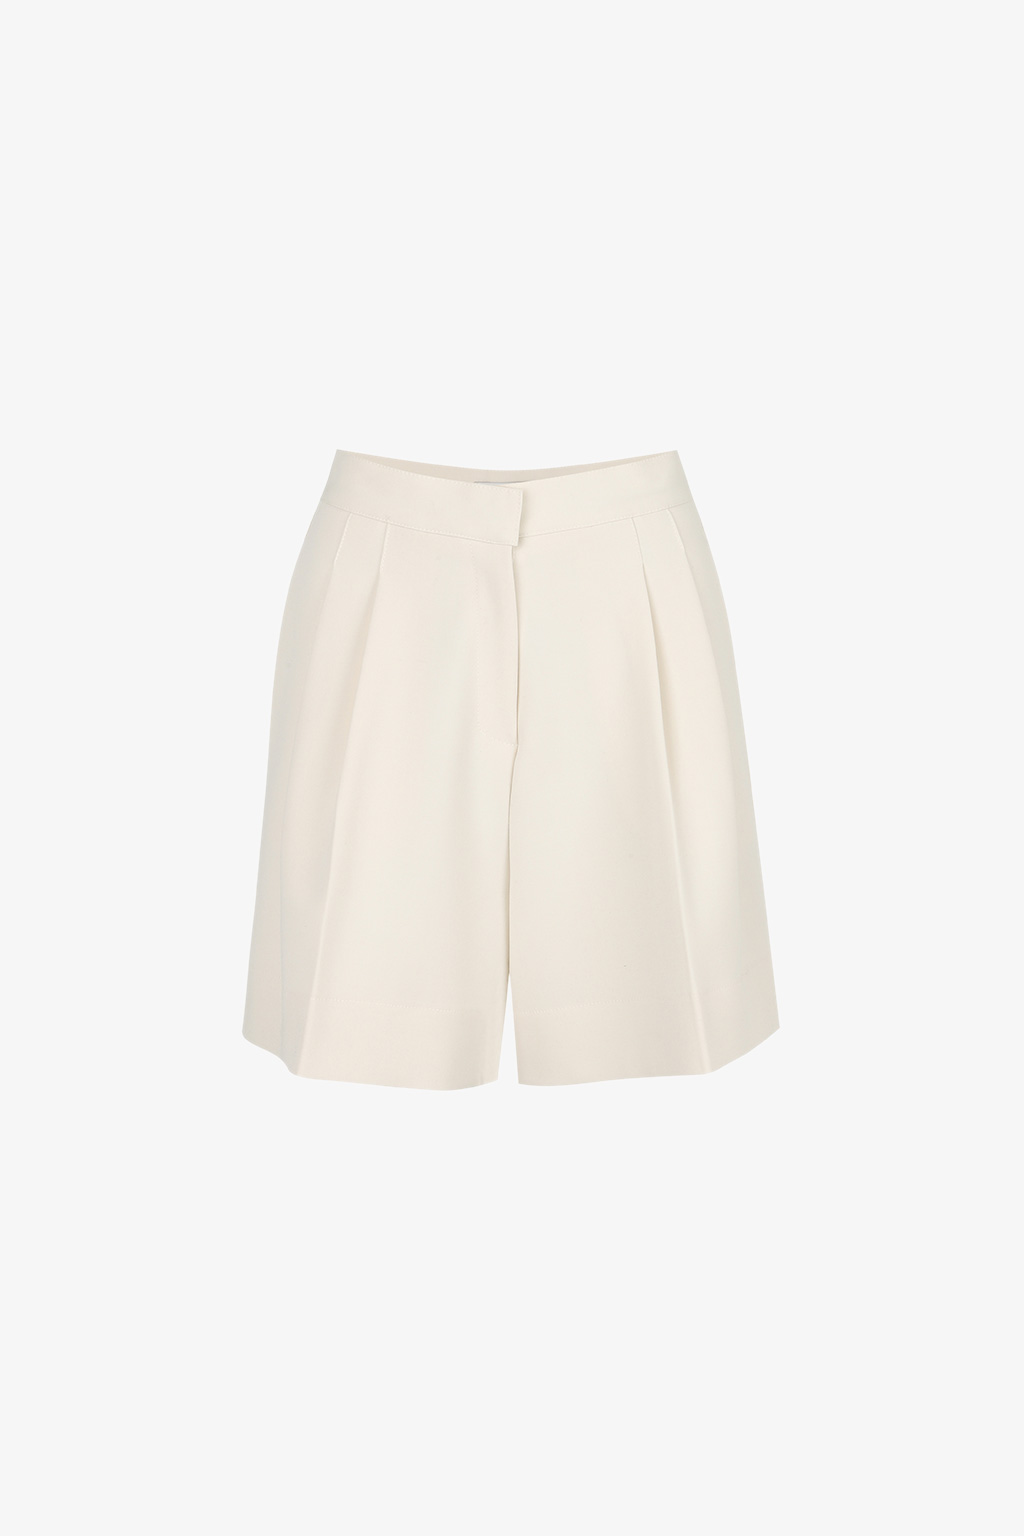 [ASTIER] fave shorts - 3차